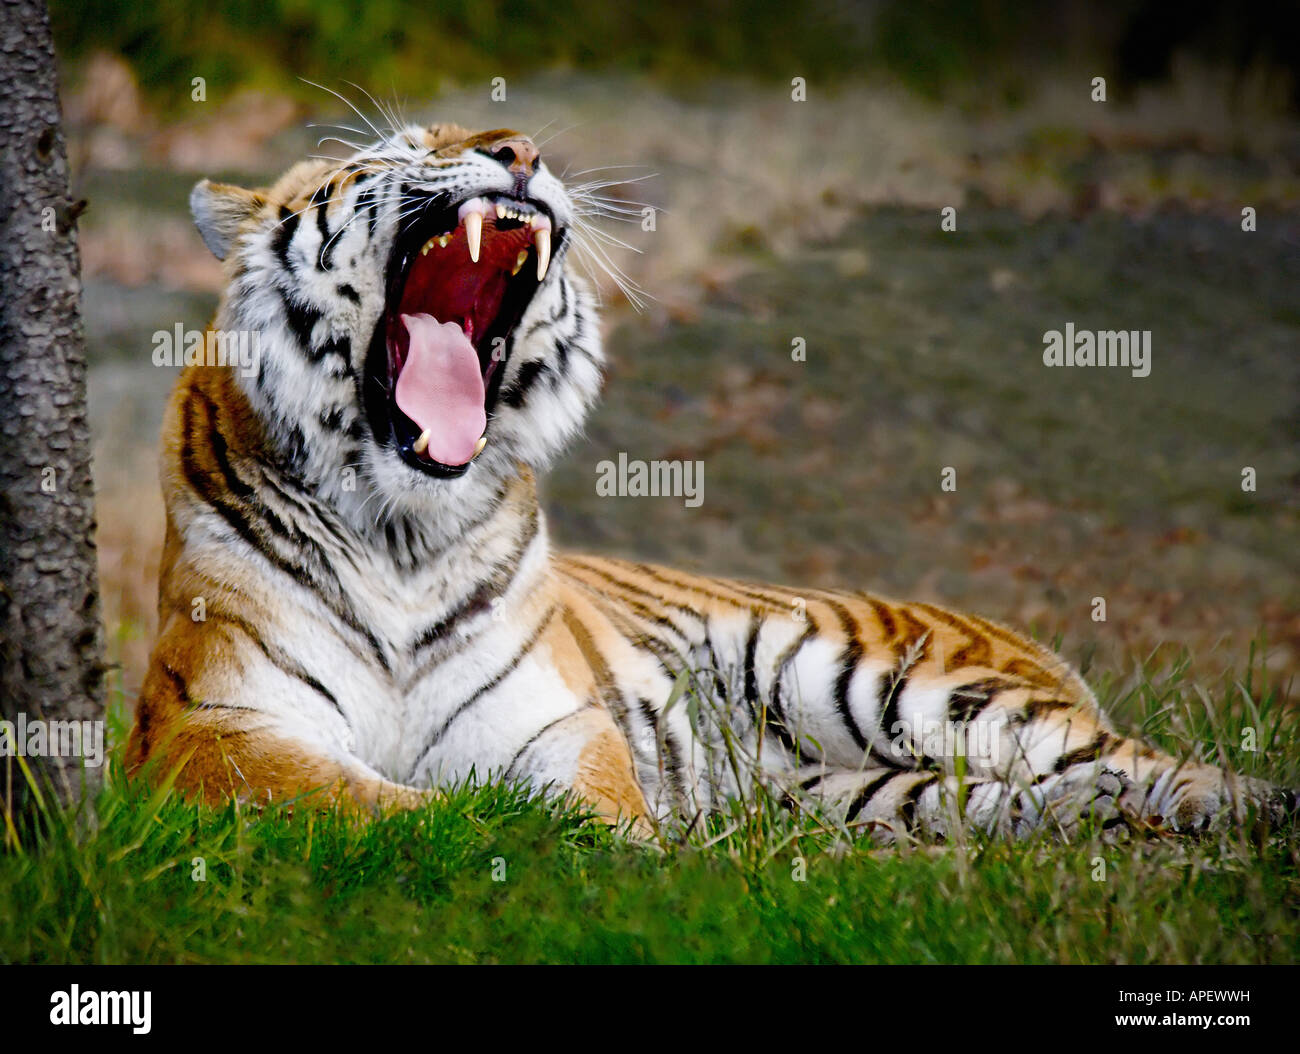 Tiger, adult, sitting on grass, with fierce expression, fully showing teeth roaring or yawning, woodsy background. Stock Photo